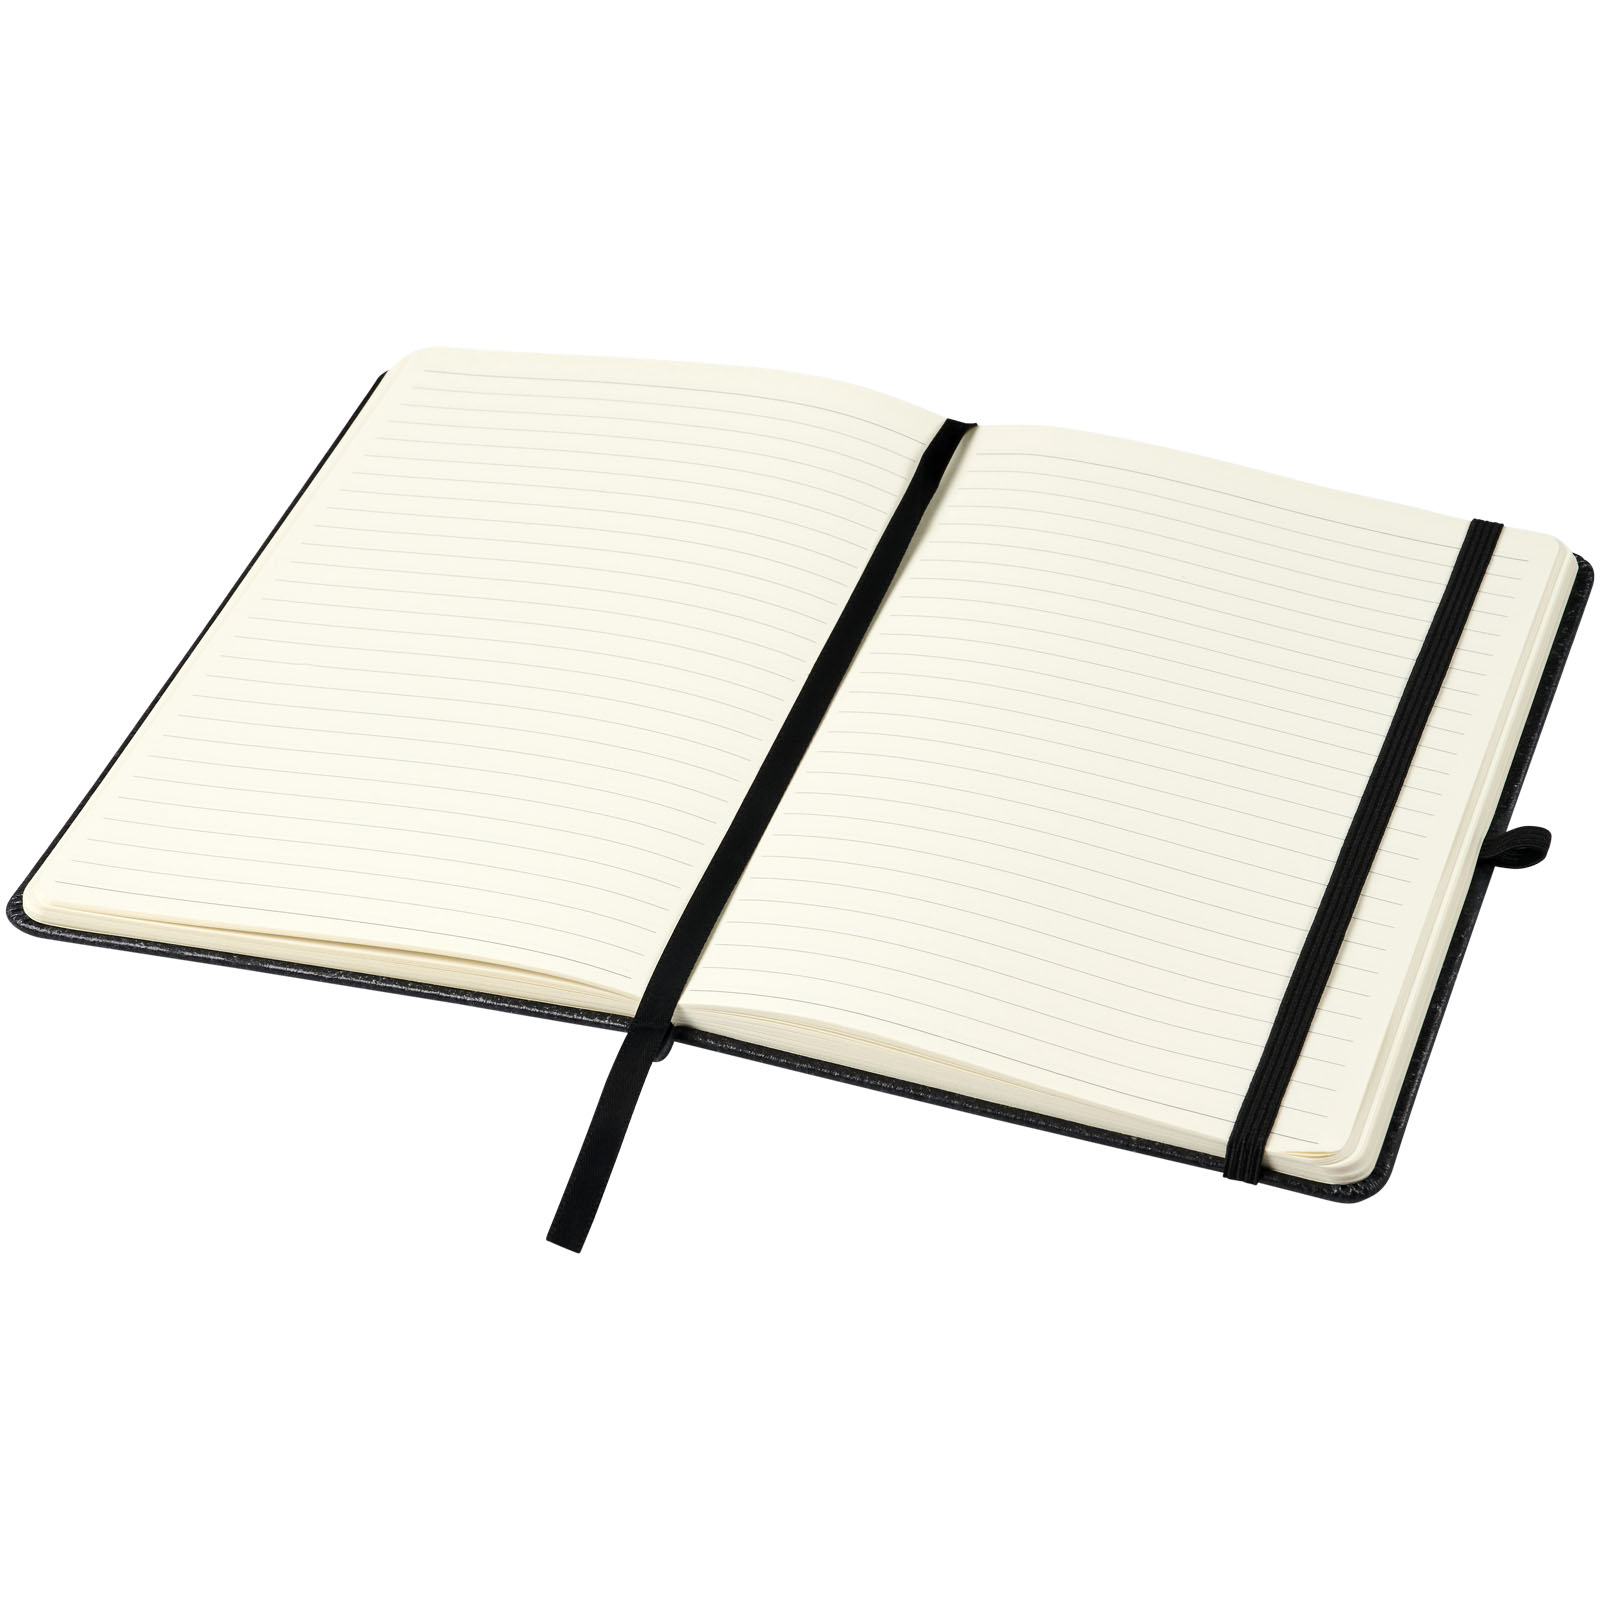 Advertising Hard cover notebooks - Atlana leather pieces notebook - 3